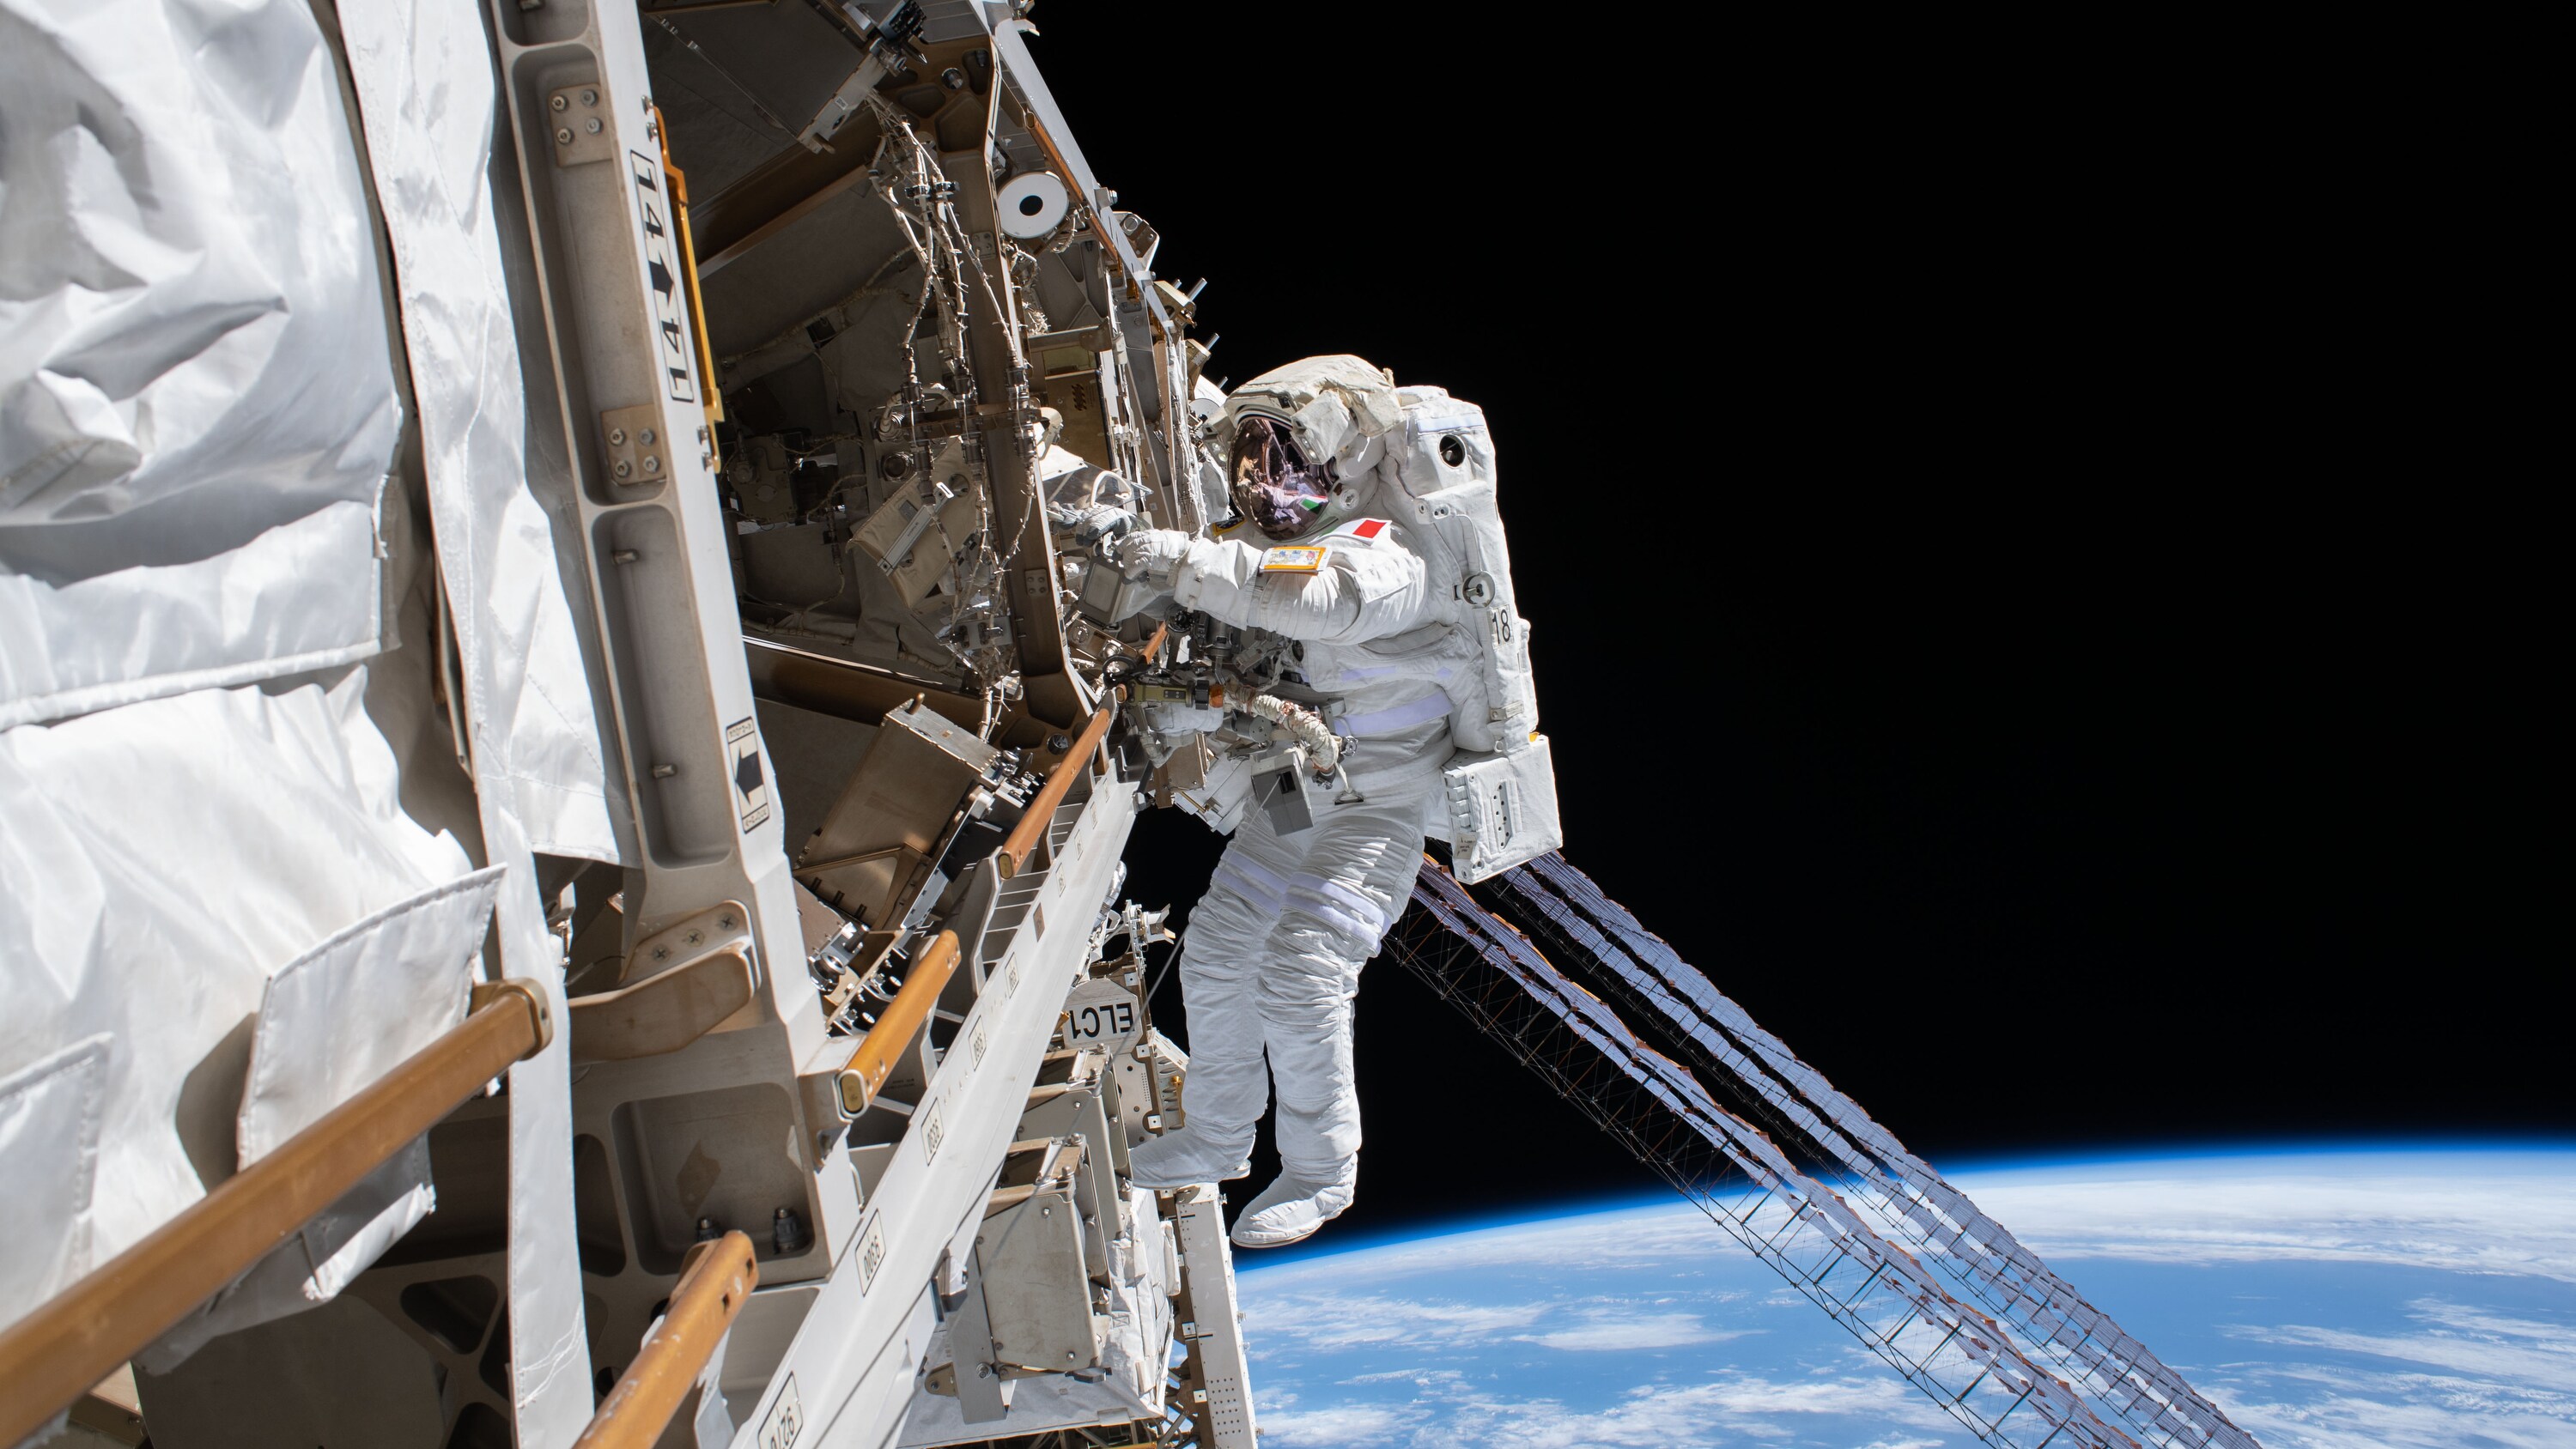 AMONG THE STARS - (Jan. 25, 2020) - ESA (European Space Agency) astronaut Luca Parmitano is pictured tethered to the International Space Station while finalizing thermal repairs on the Alpha Magnetic Spectrometer, a dark matter and antimatter detector, during a spacewalk that lasted 6 hours and 16 minutes. (NASA) LUCA PARMITANO